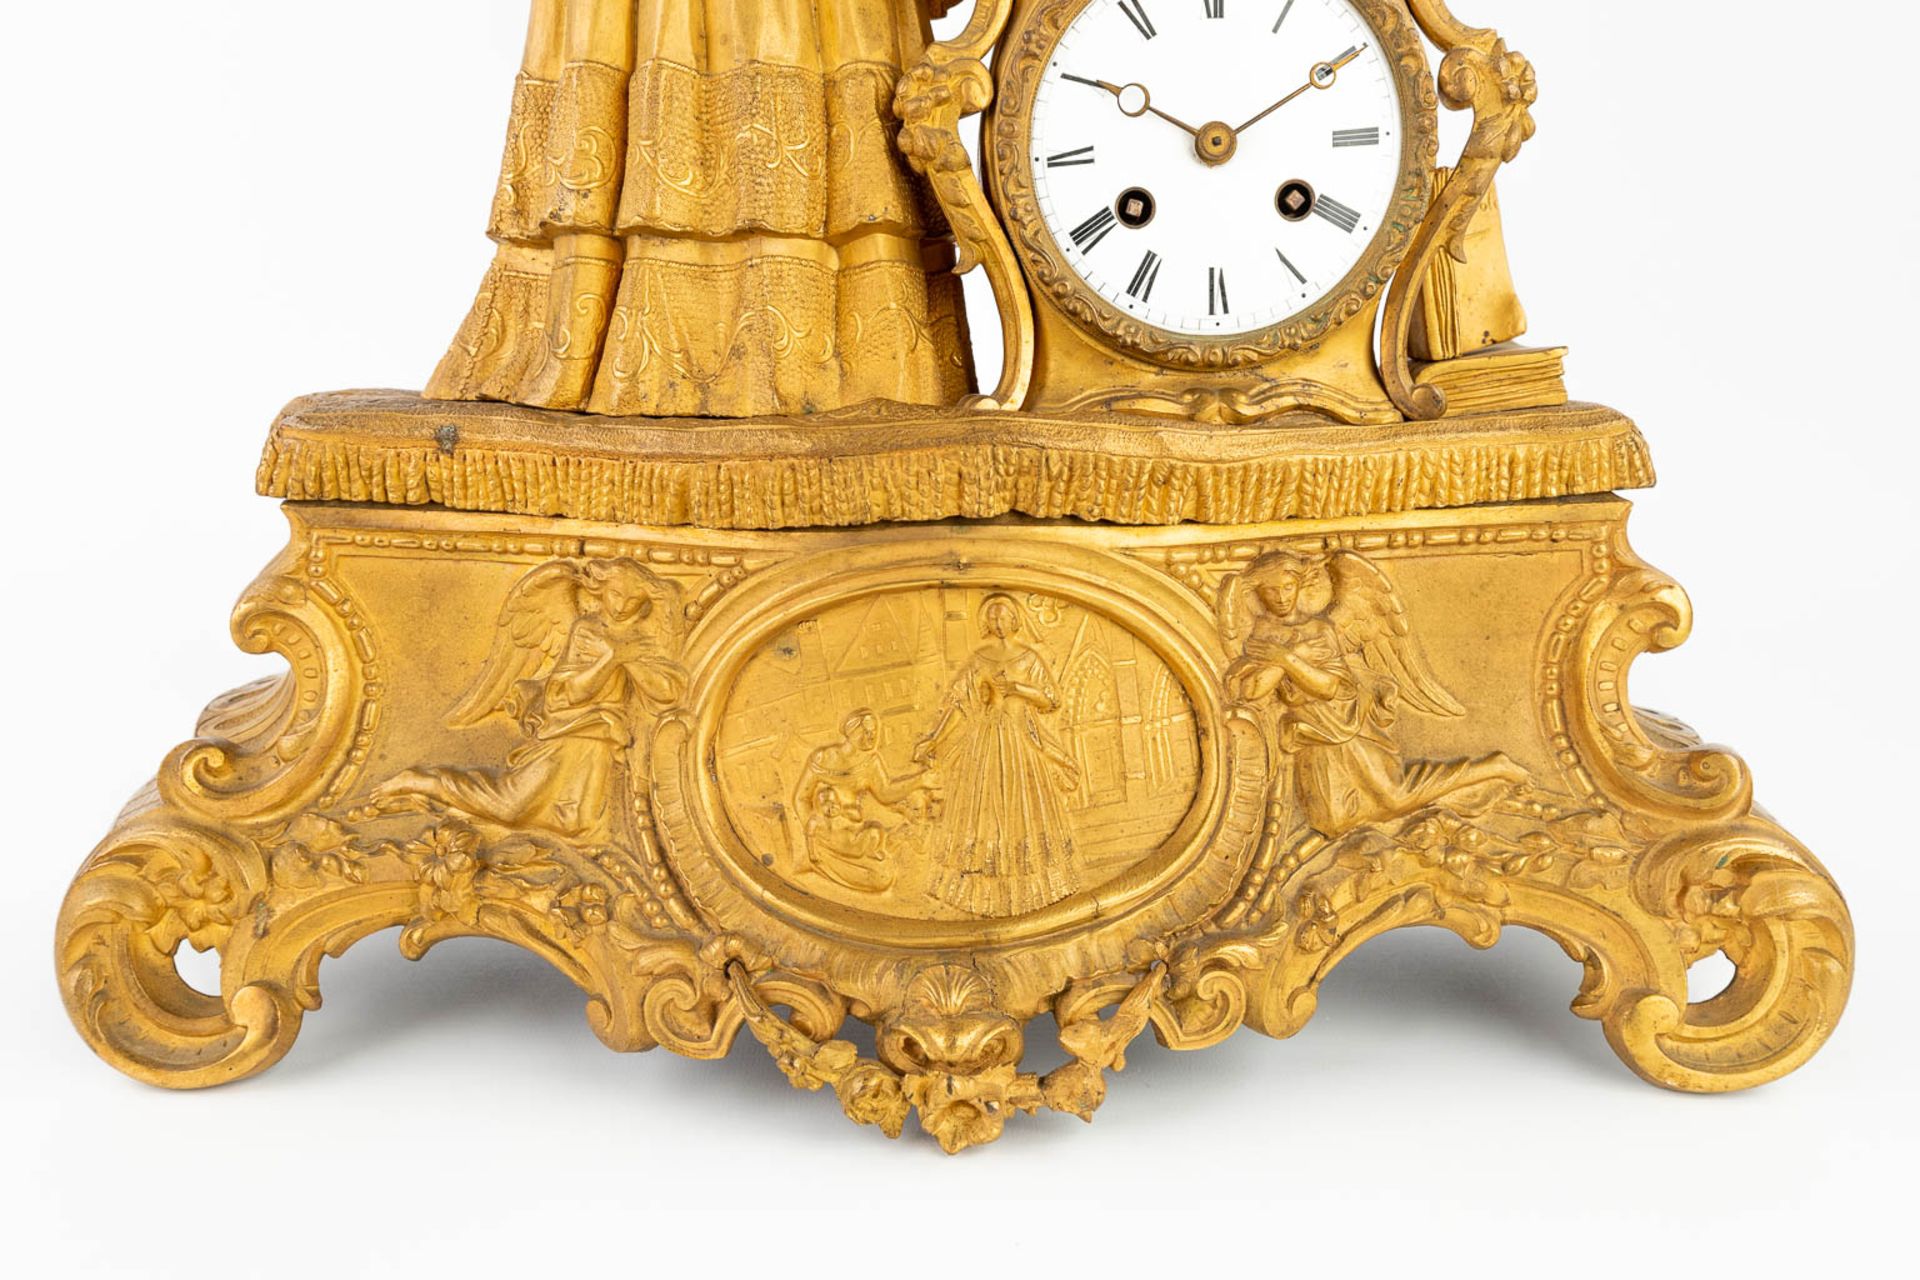 An antique mantle clock made of gilt spelter. 19th C. (44 x 45cm) - Image 16 of 16